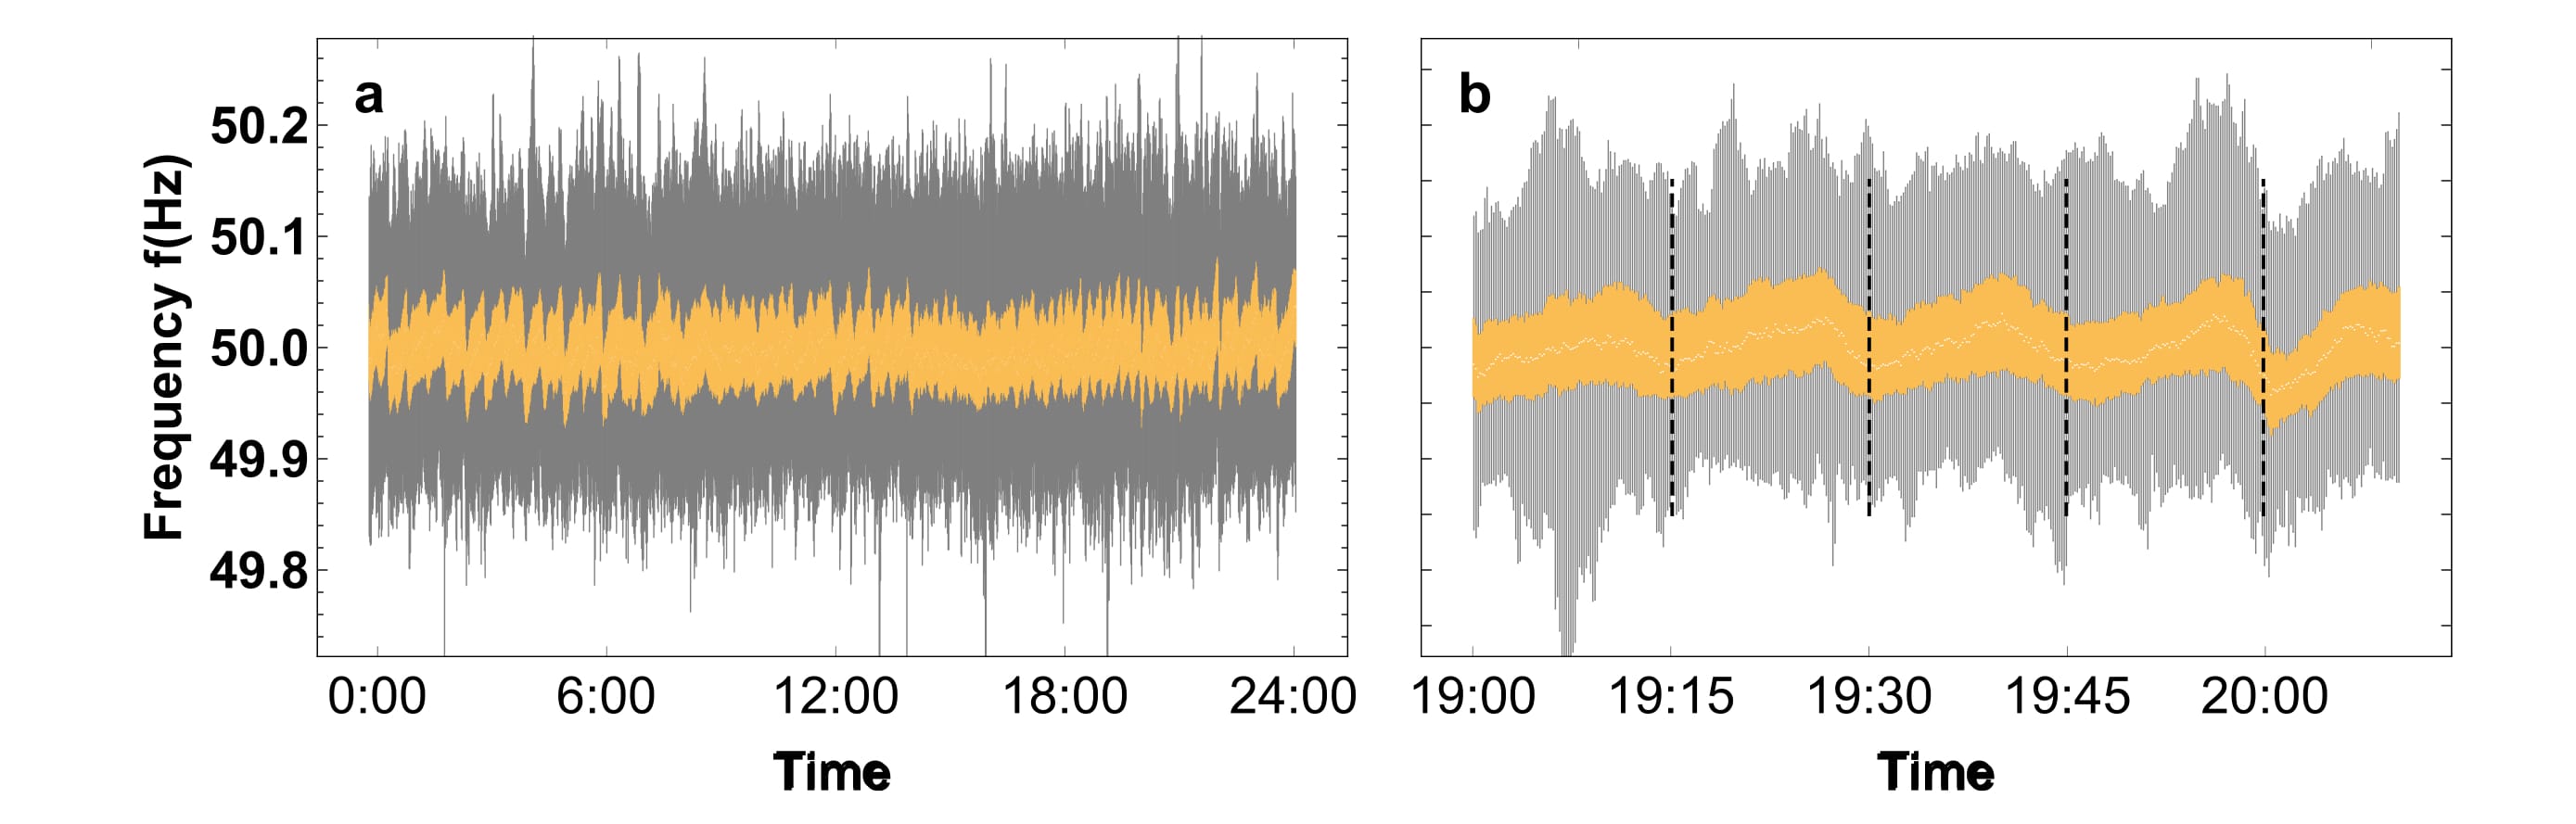 Frequency fluctuations around 50 Hz during a typical day in the UK. Fig.b gives a more detailed picture of the evening period.